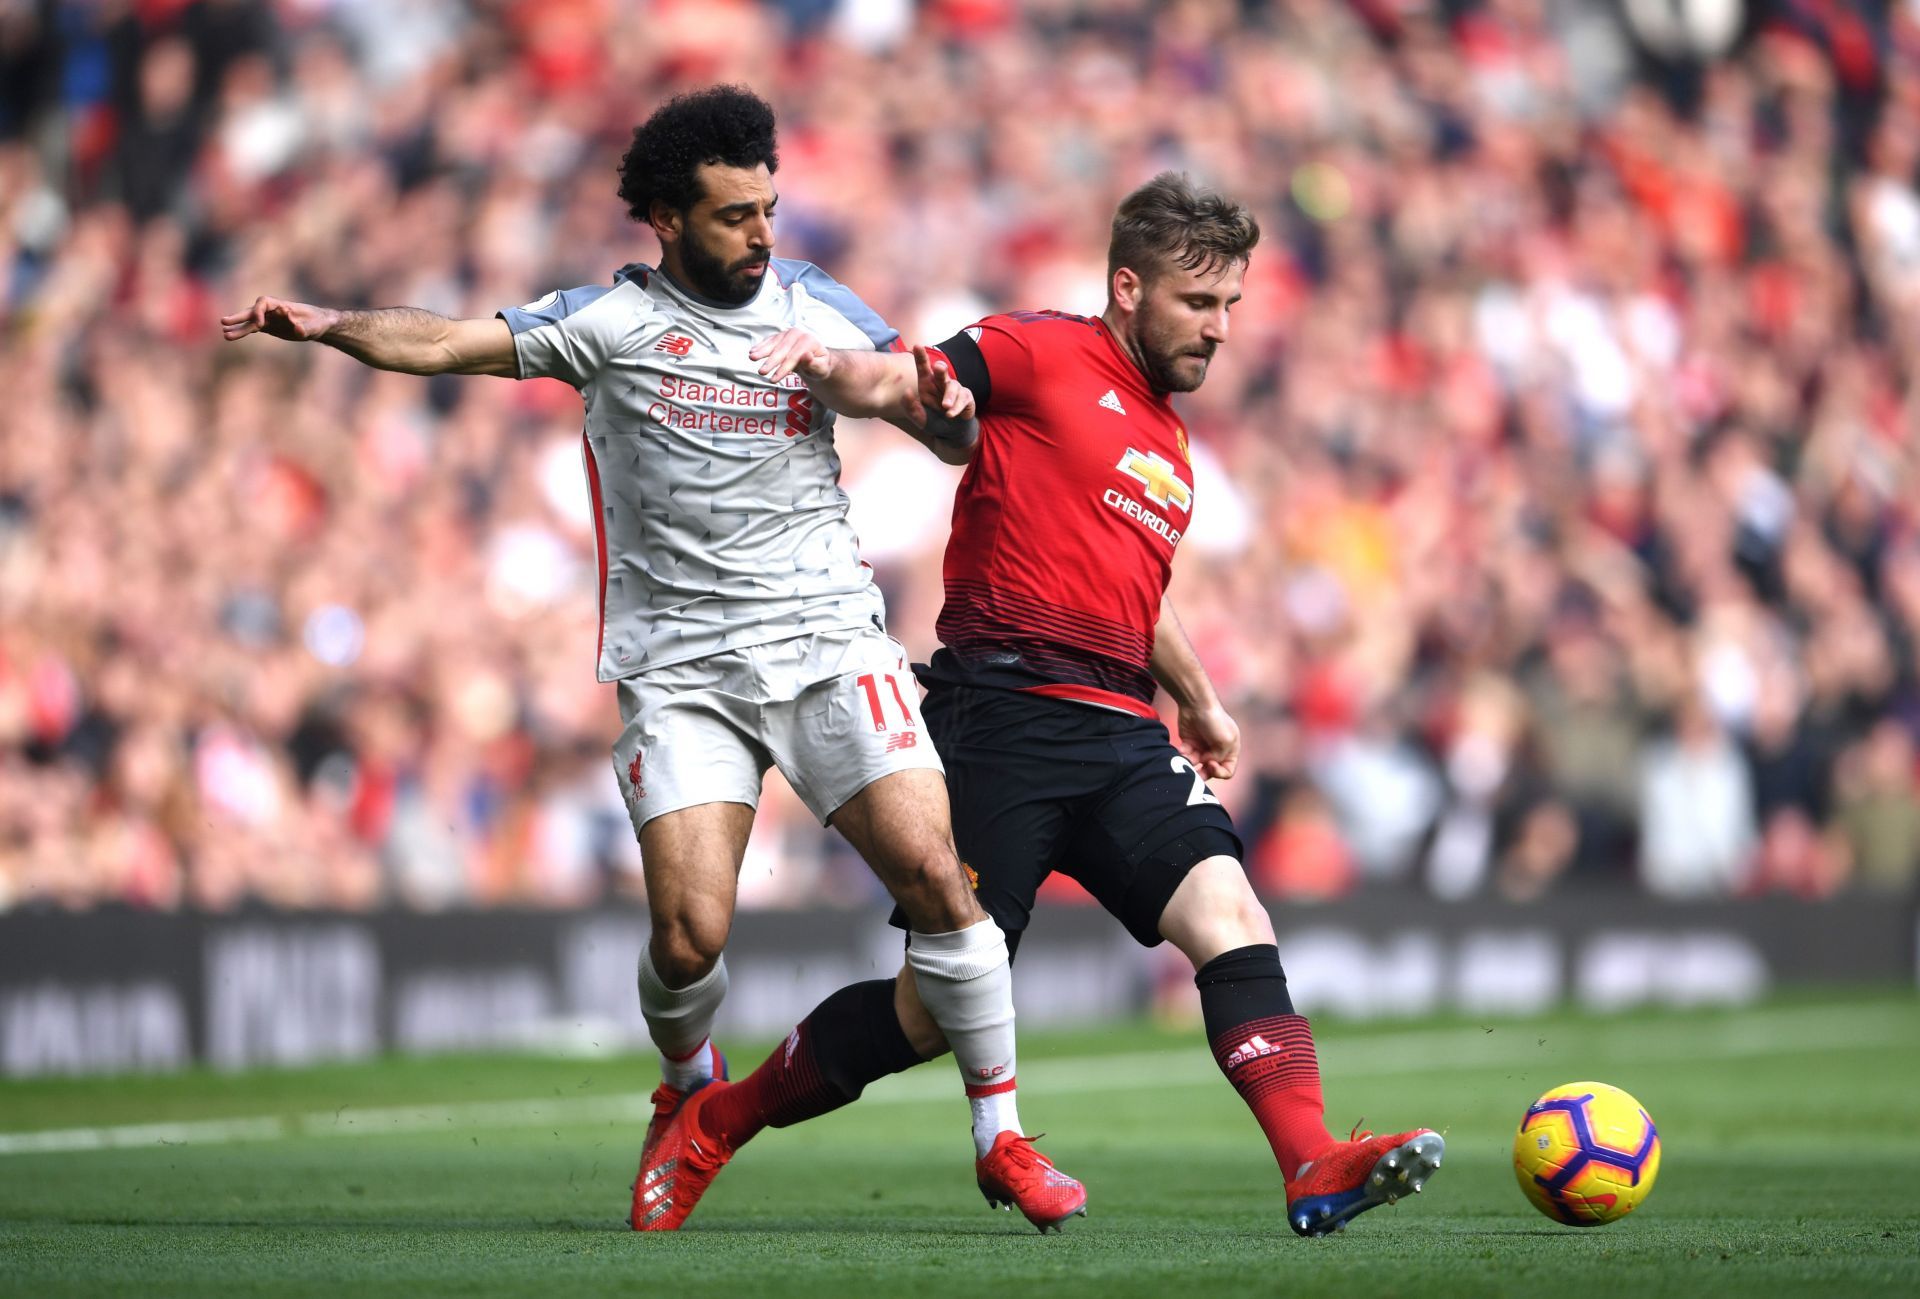 Manchester United take on Liverpool this weekend